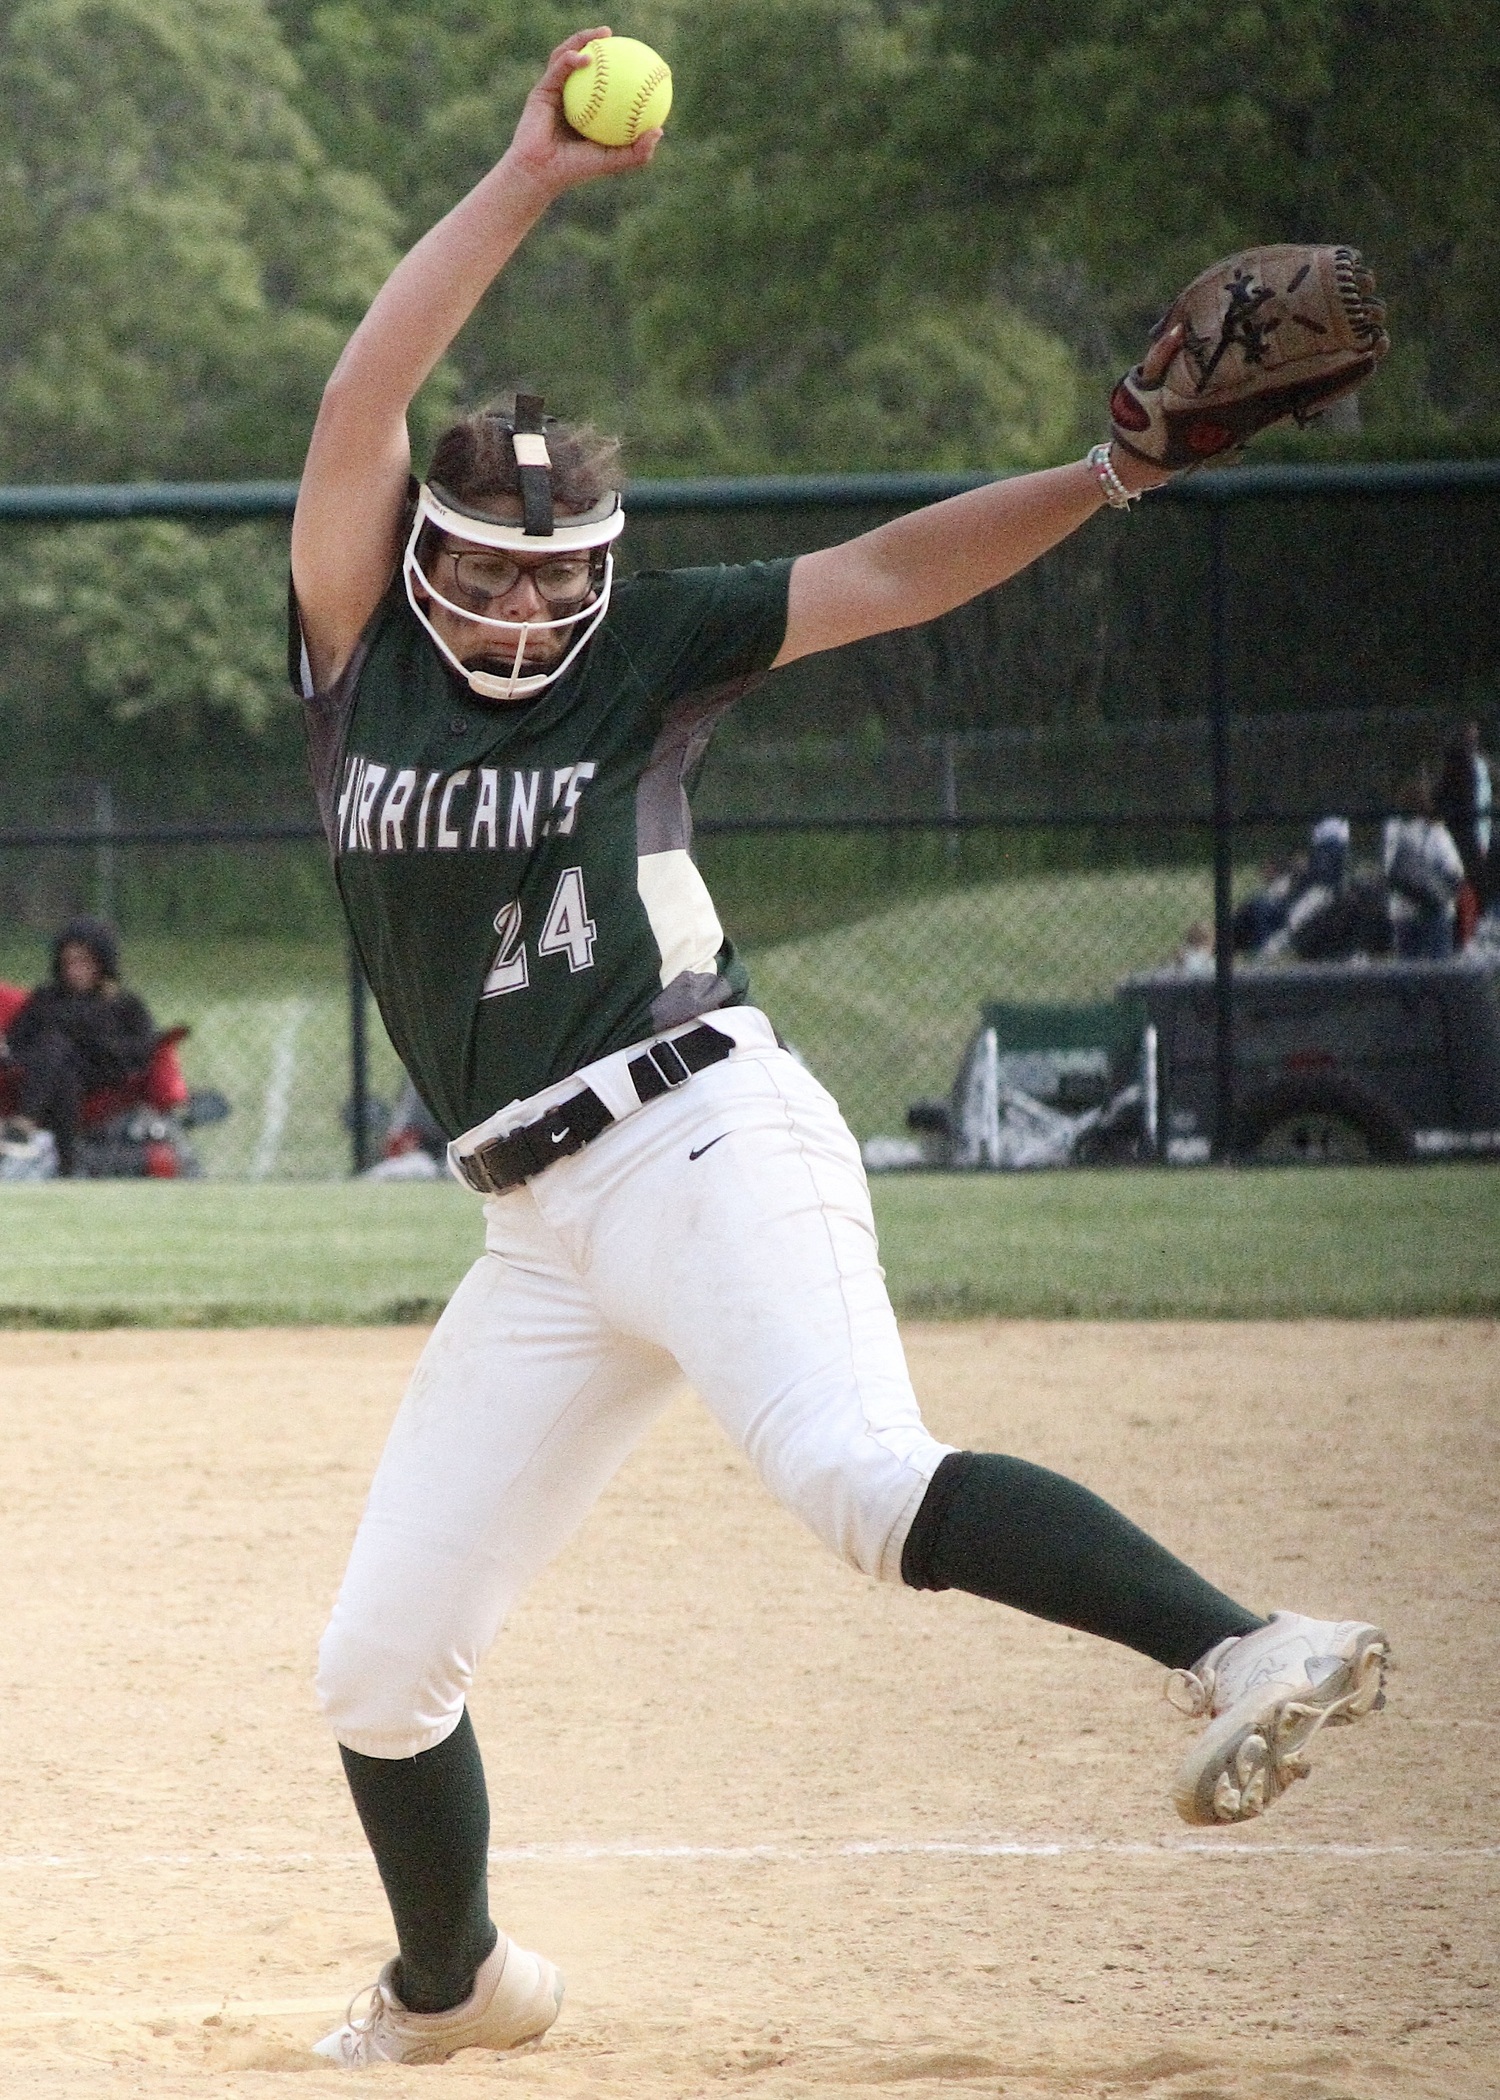 Starting pitcher Addison Celi tossed 10 strikeouts over seven innings. DESIRÉE KEEGAN